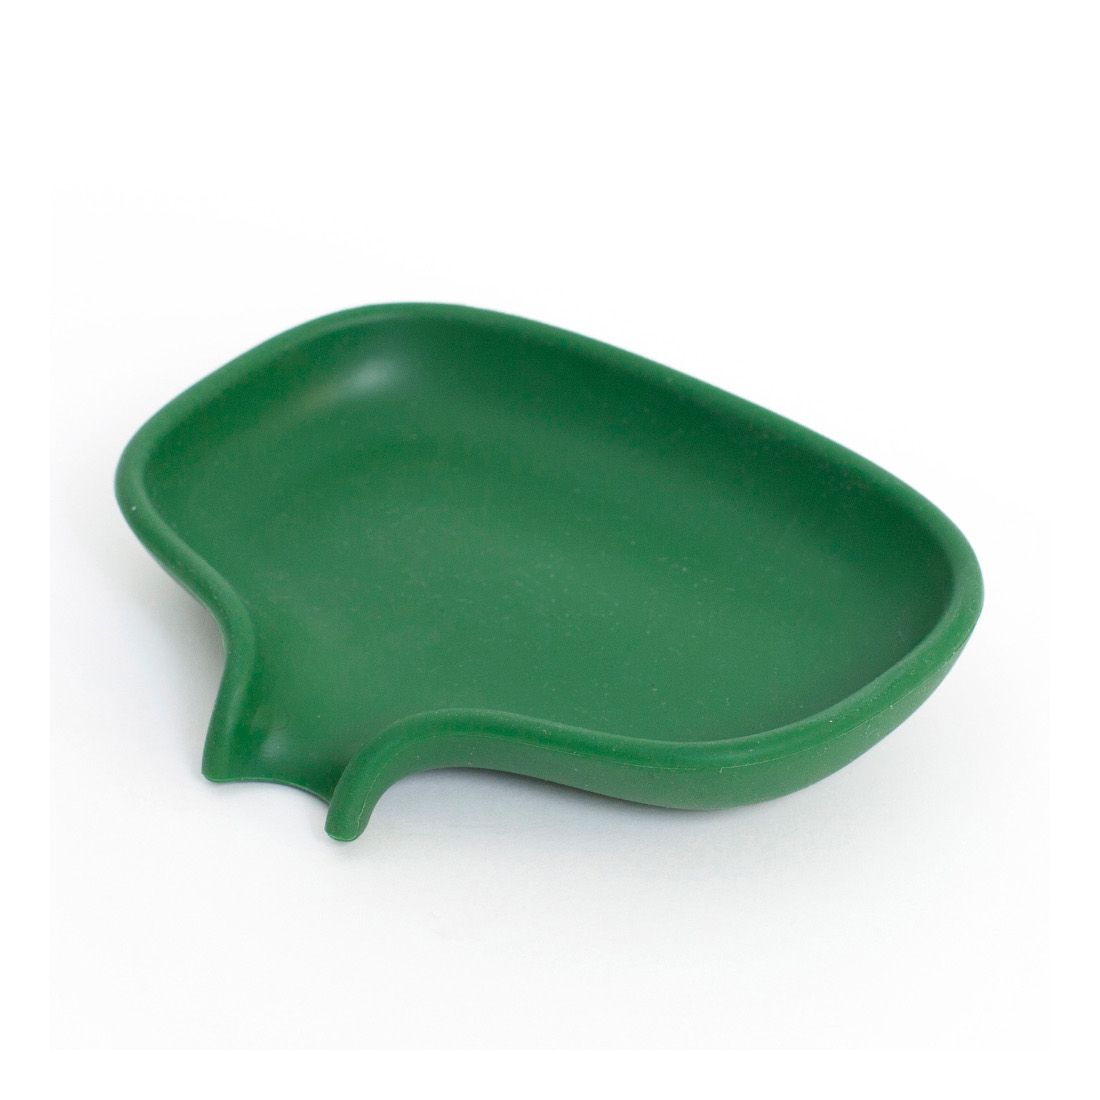 bosign-bosign-flow-soapsaver-soap-dish-large-with-draining-spout-in-dark-green-recyclable-silicone